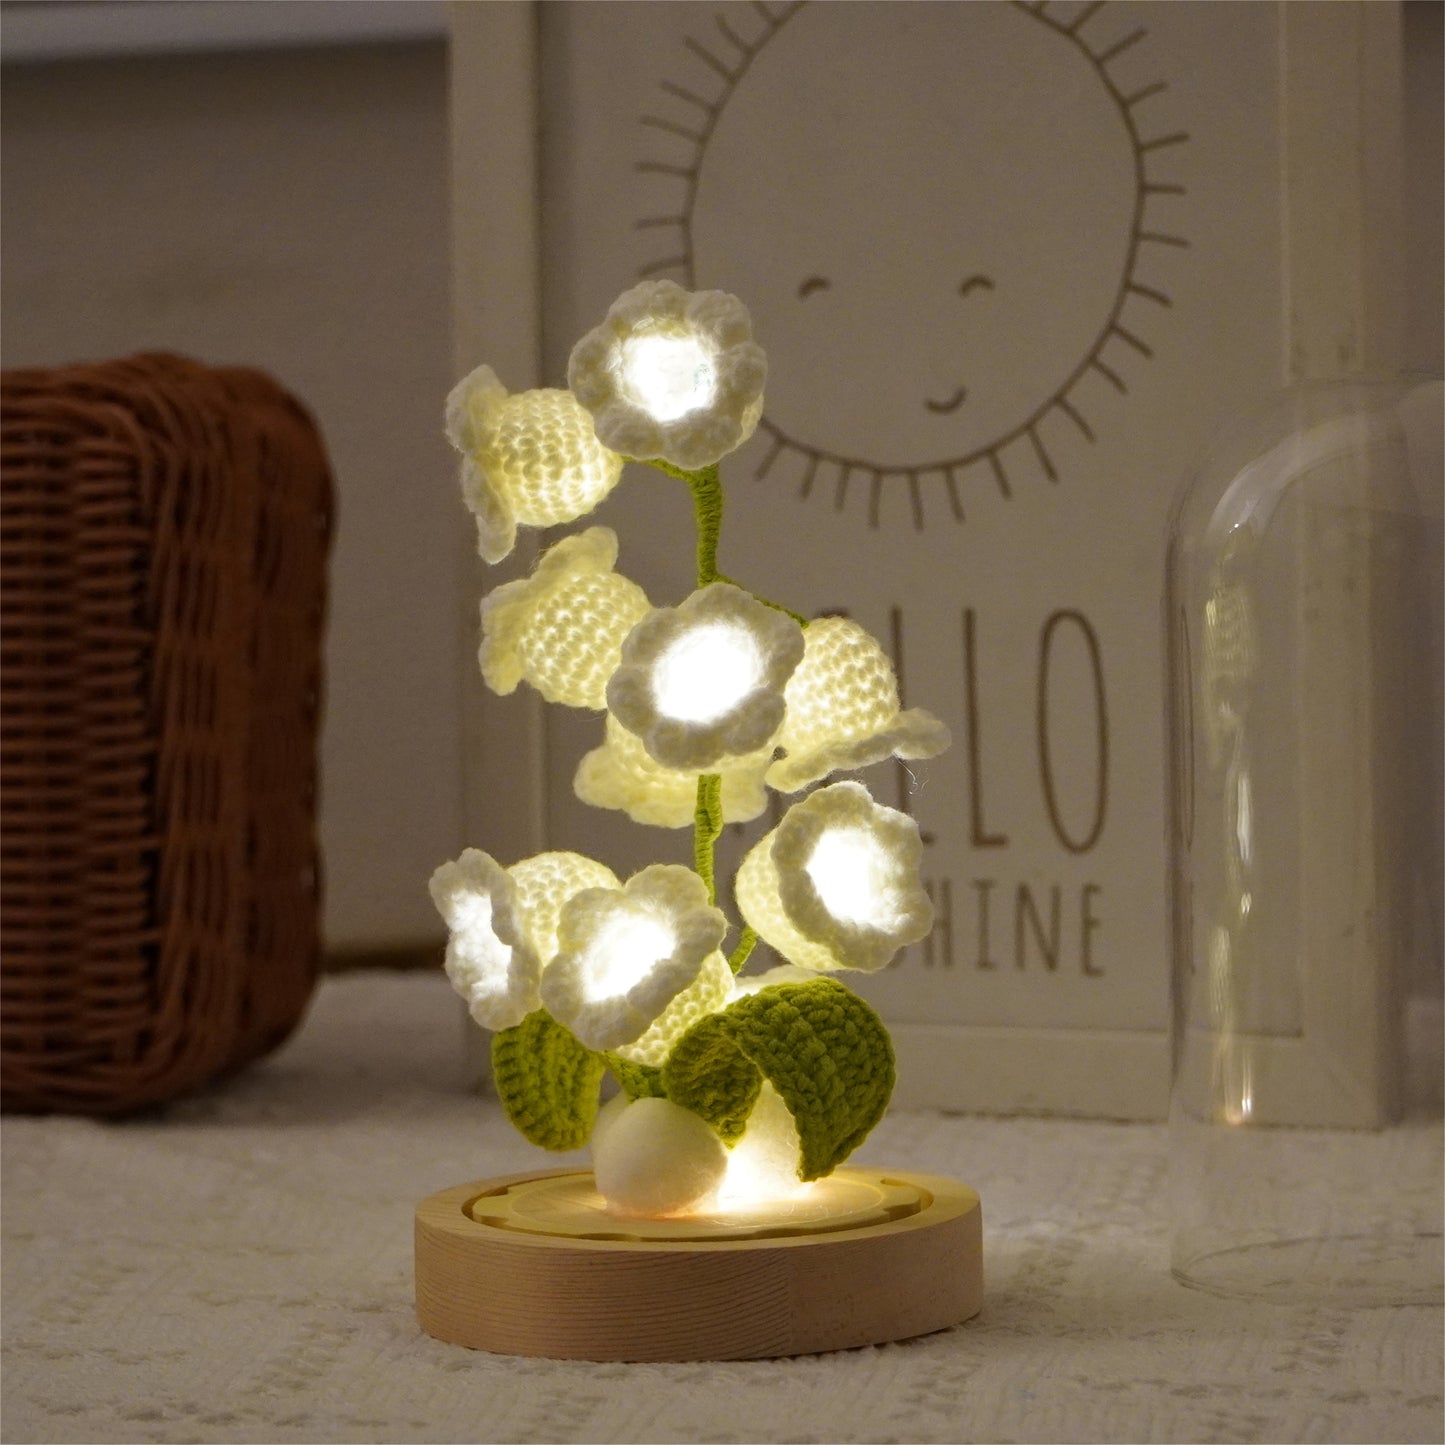 Luminescent Lily of the Valley: Handmade Crocheted Pendant Lamp with Glass Shade